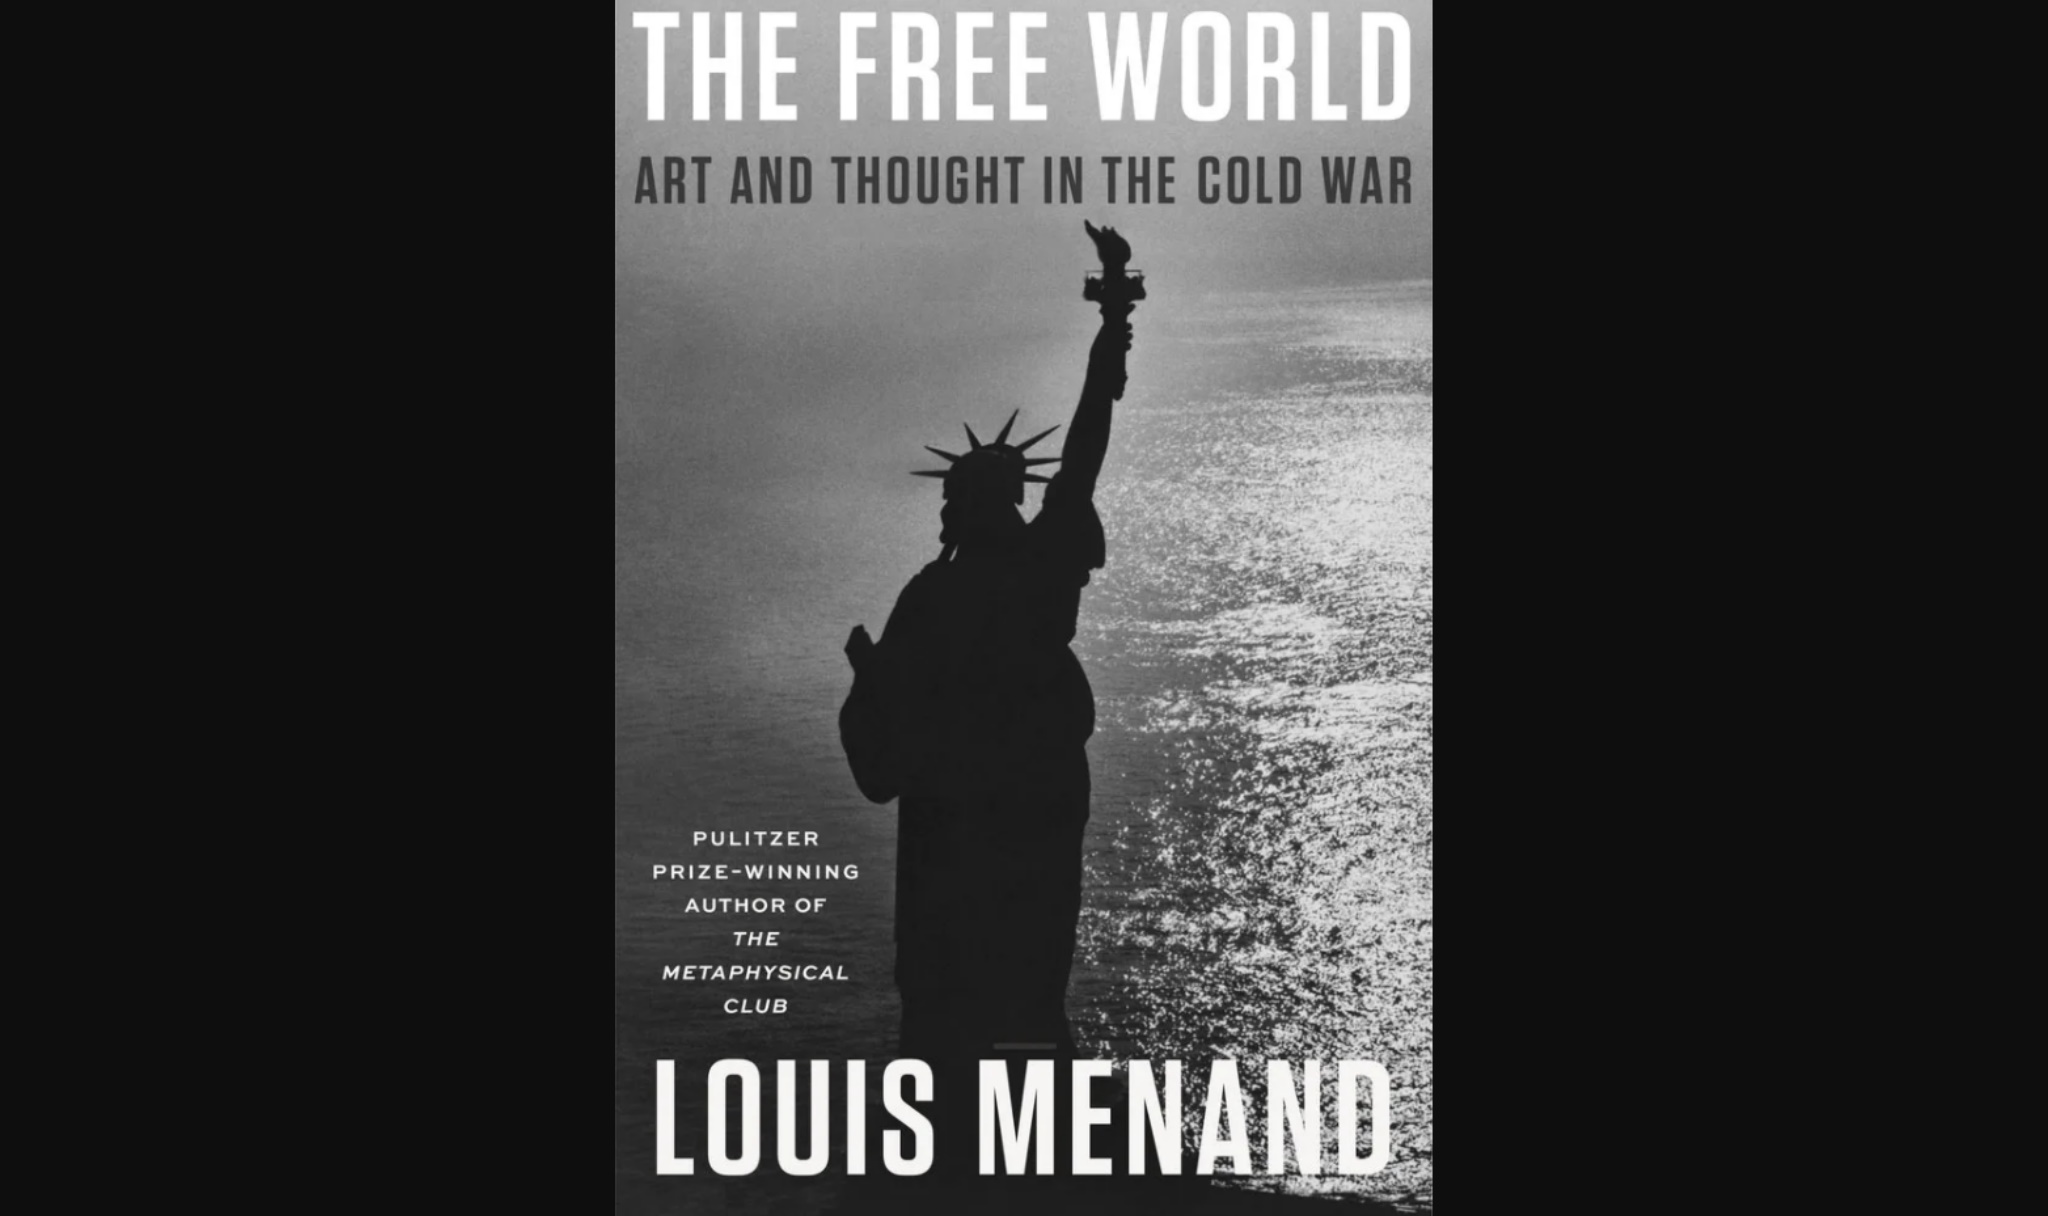 Louis Menand - The Free World: Art and Thought in the Cold War